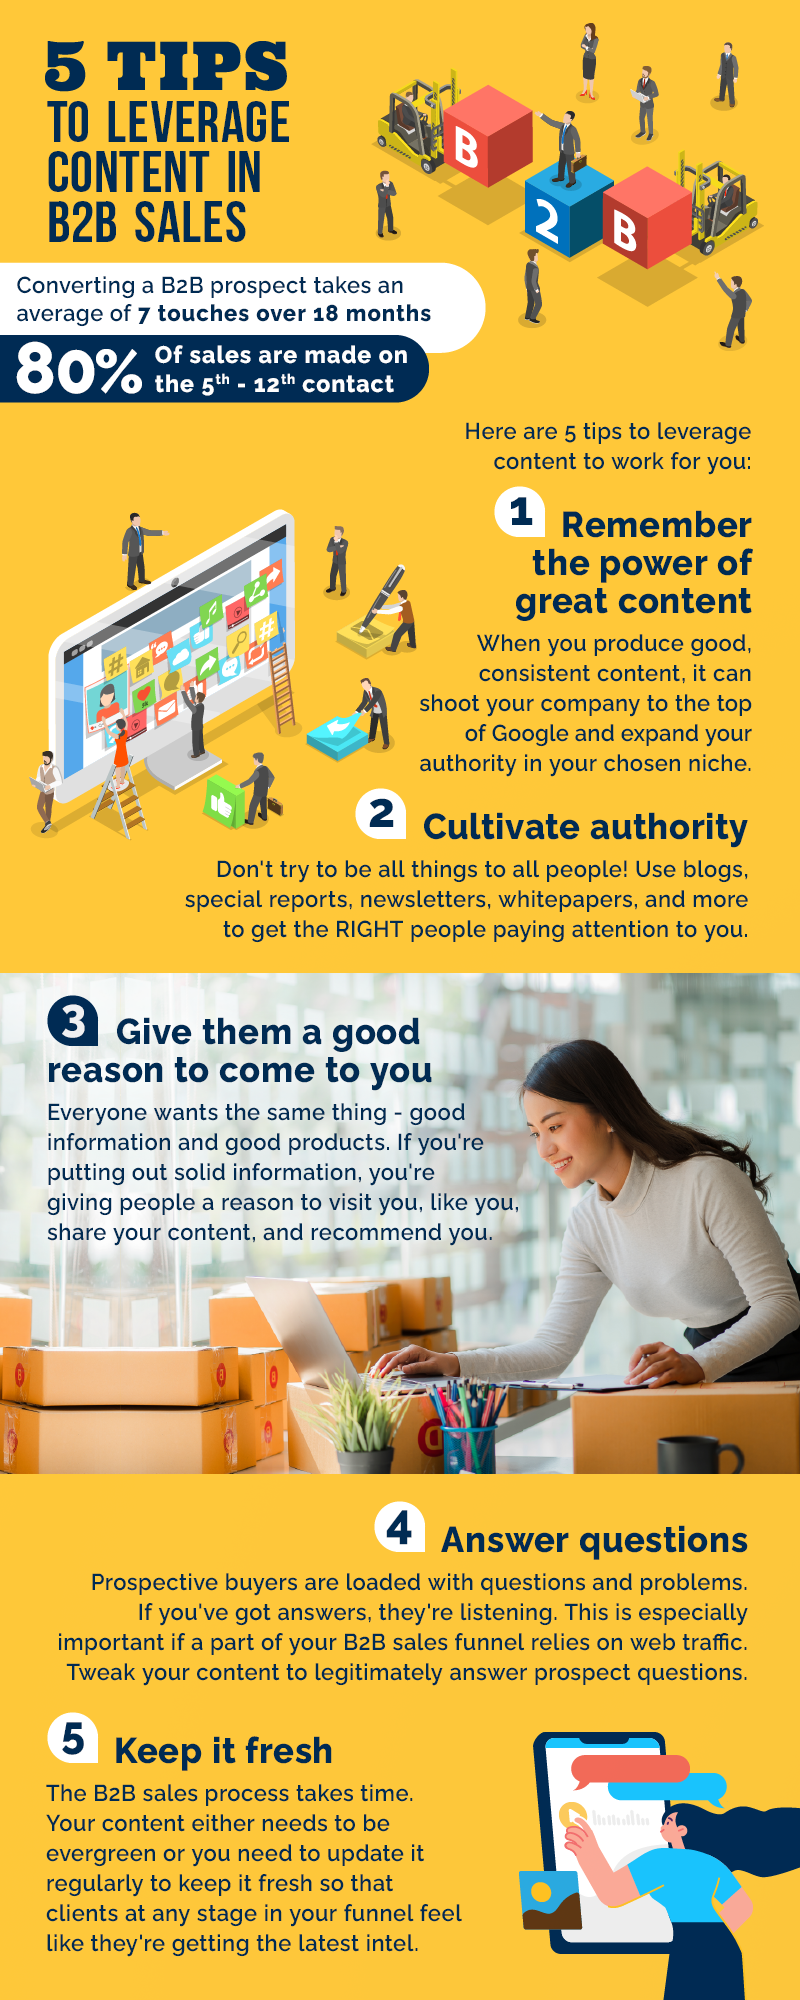 5-Tips-to-Leveage-Content-for-B2B-Sales-Infographic